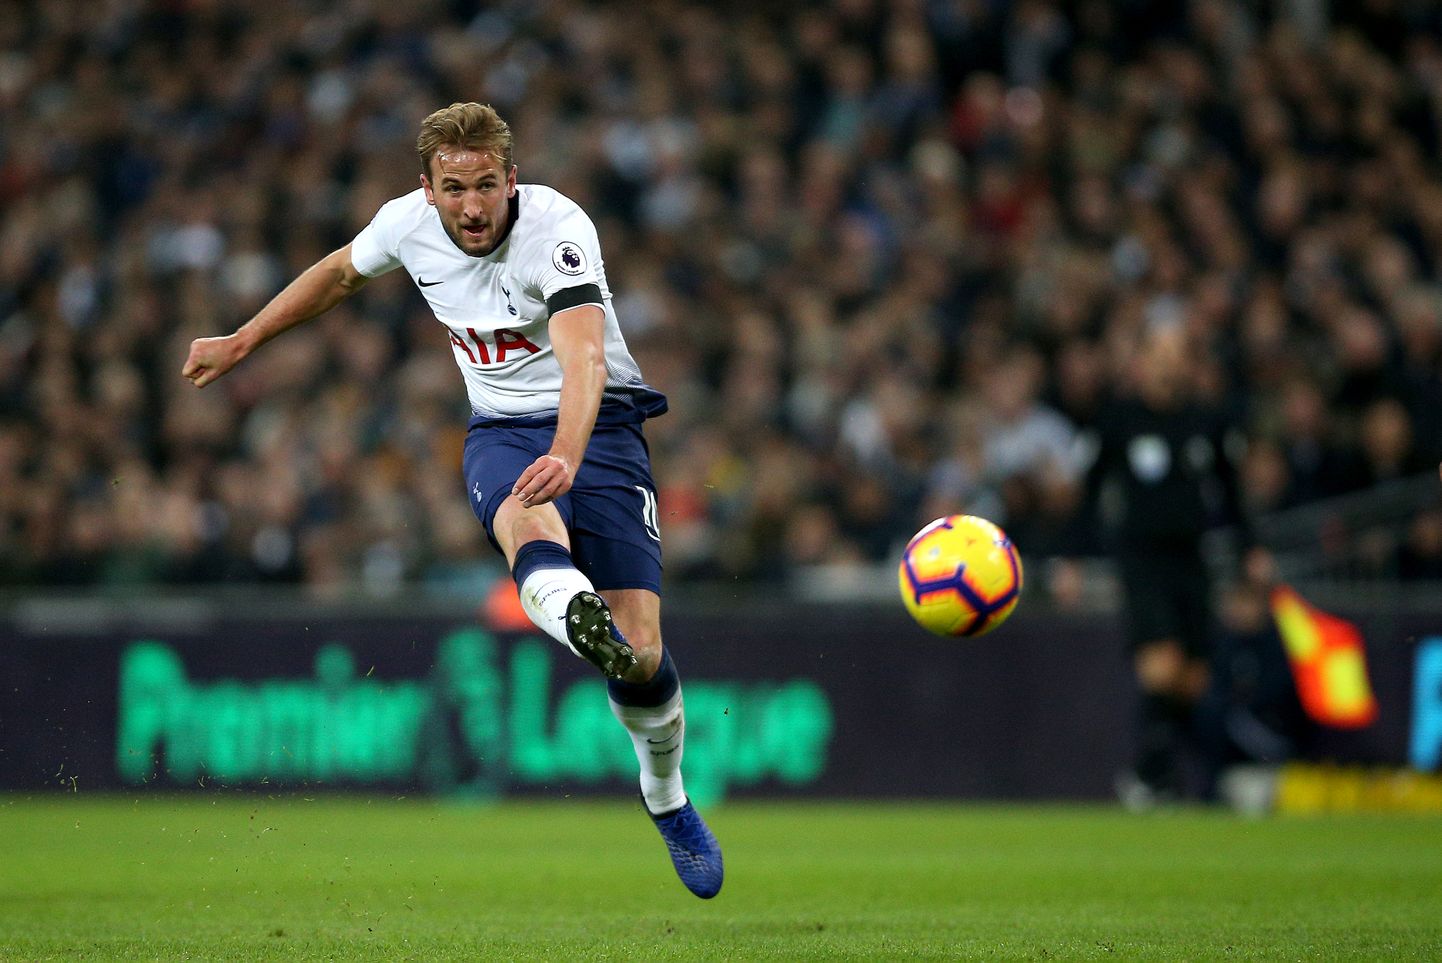 Tottenham Hotspur's Harry Kane scores his side's second goal of the game